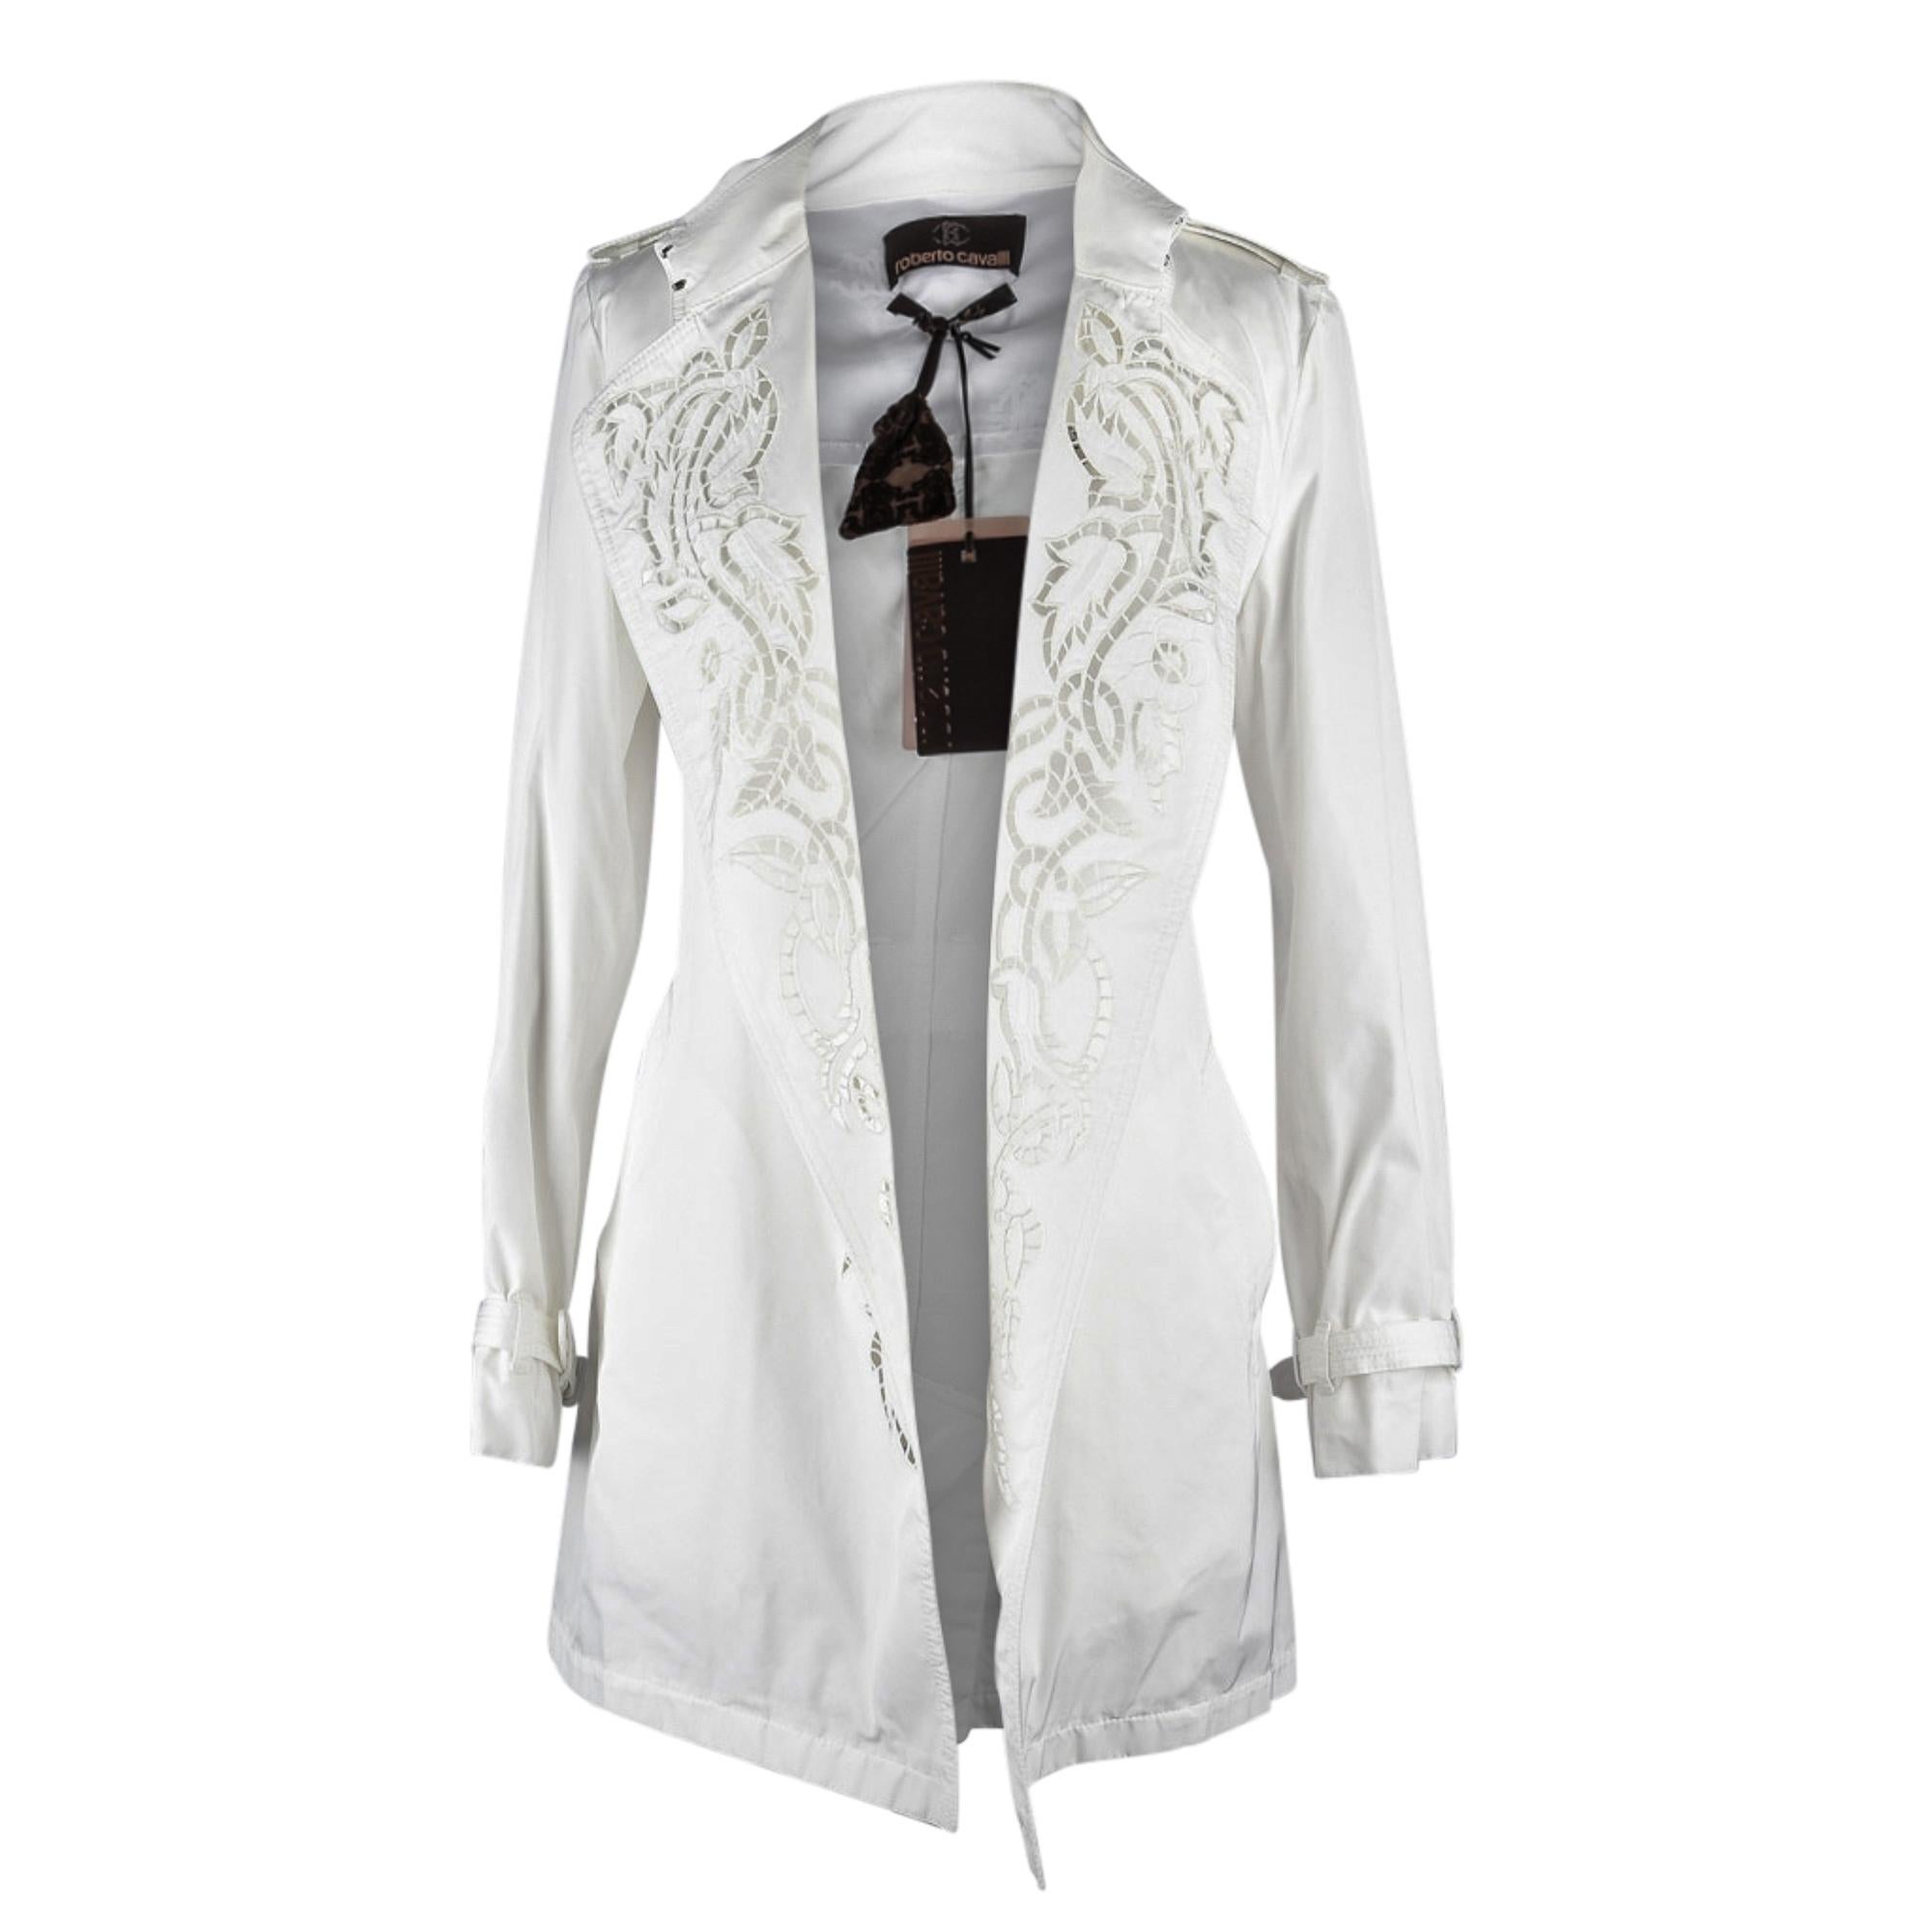 Roberto Cavalli Coat Trench Laser Cut Detail Winter White 42 / 8 New w/ Tag 5